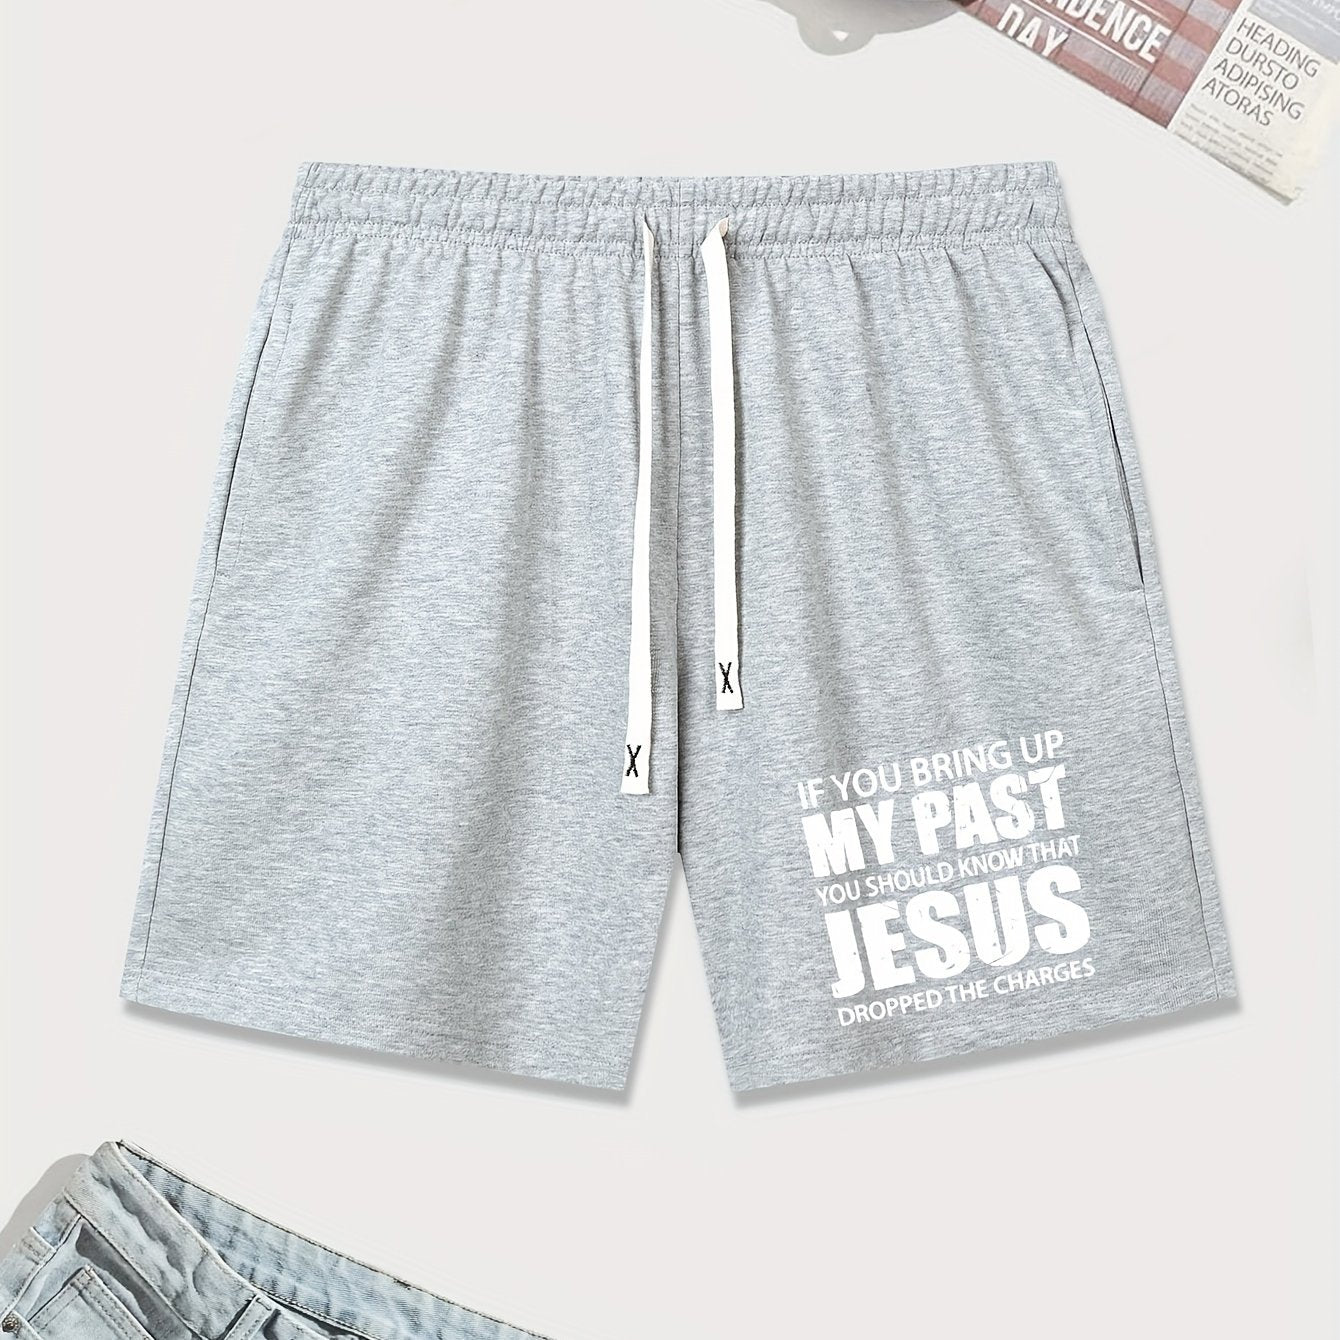 Jesus Dropped The Charges Men's Christian Shorts claimedbygoddesigns